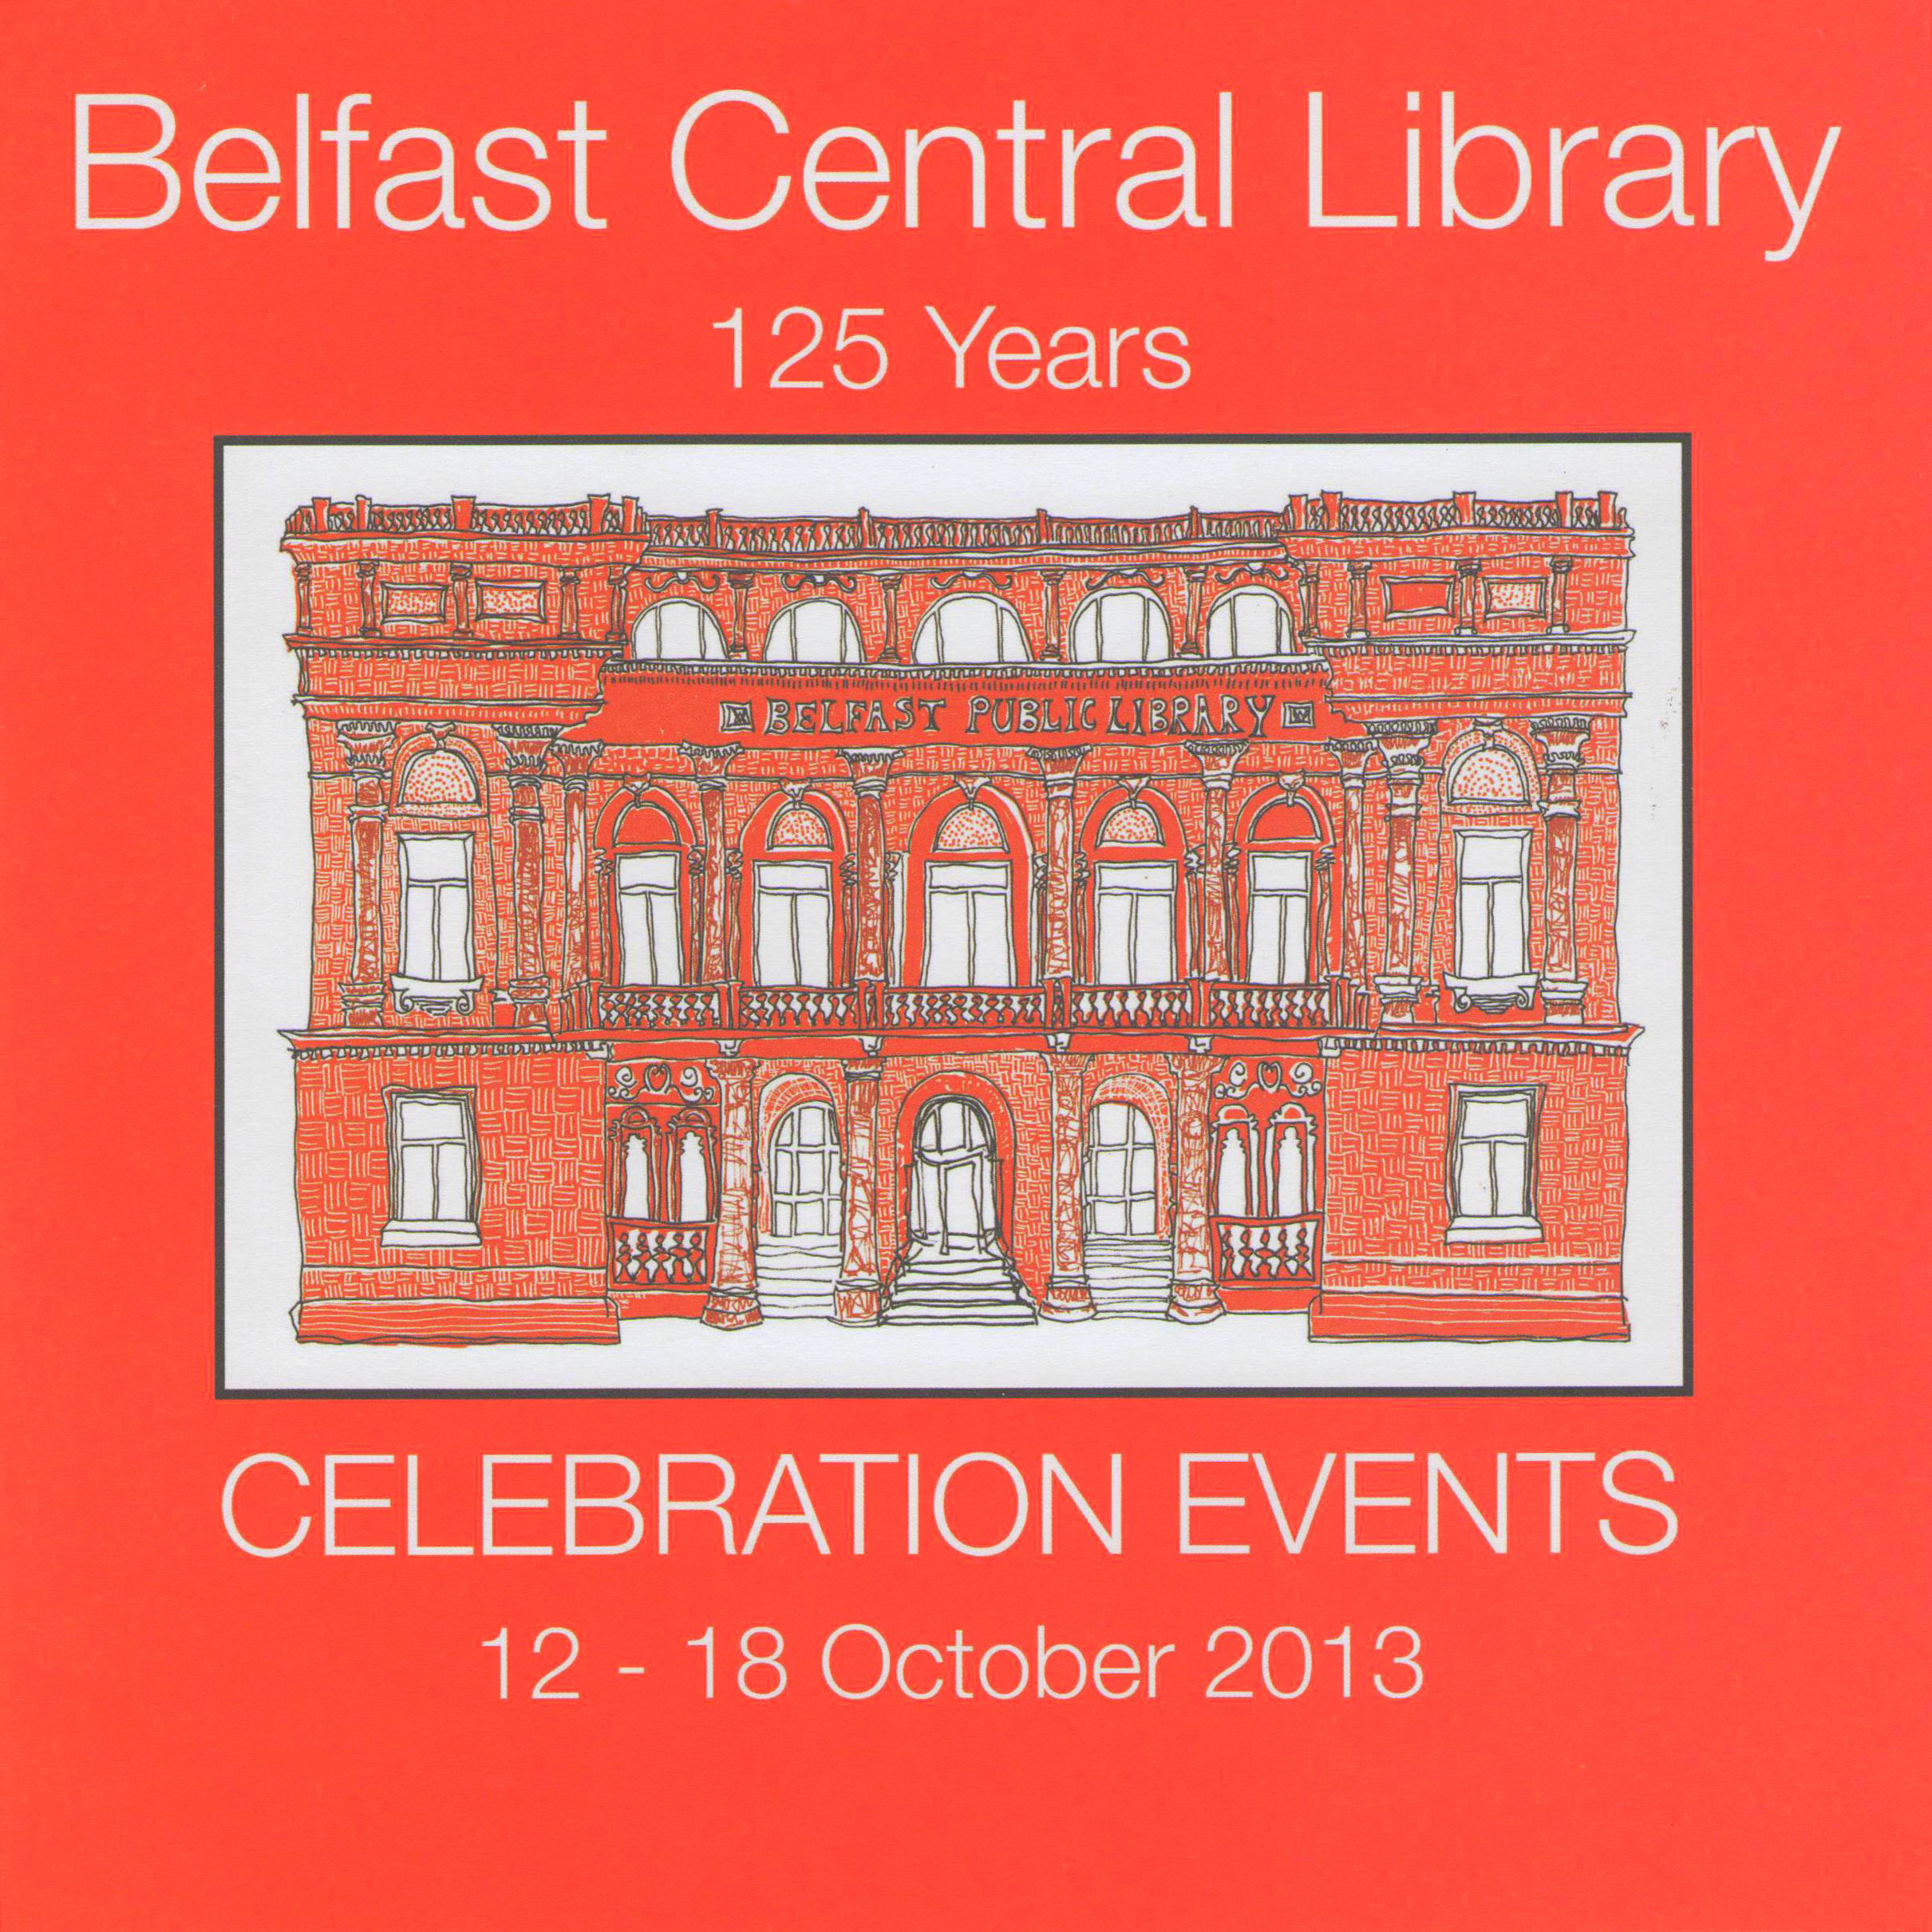 Belfast Central Library - 125 Years Celebration Events